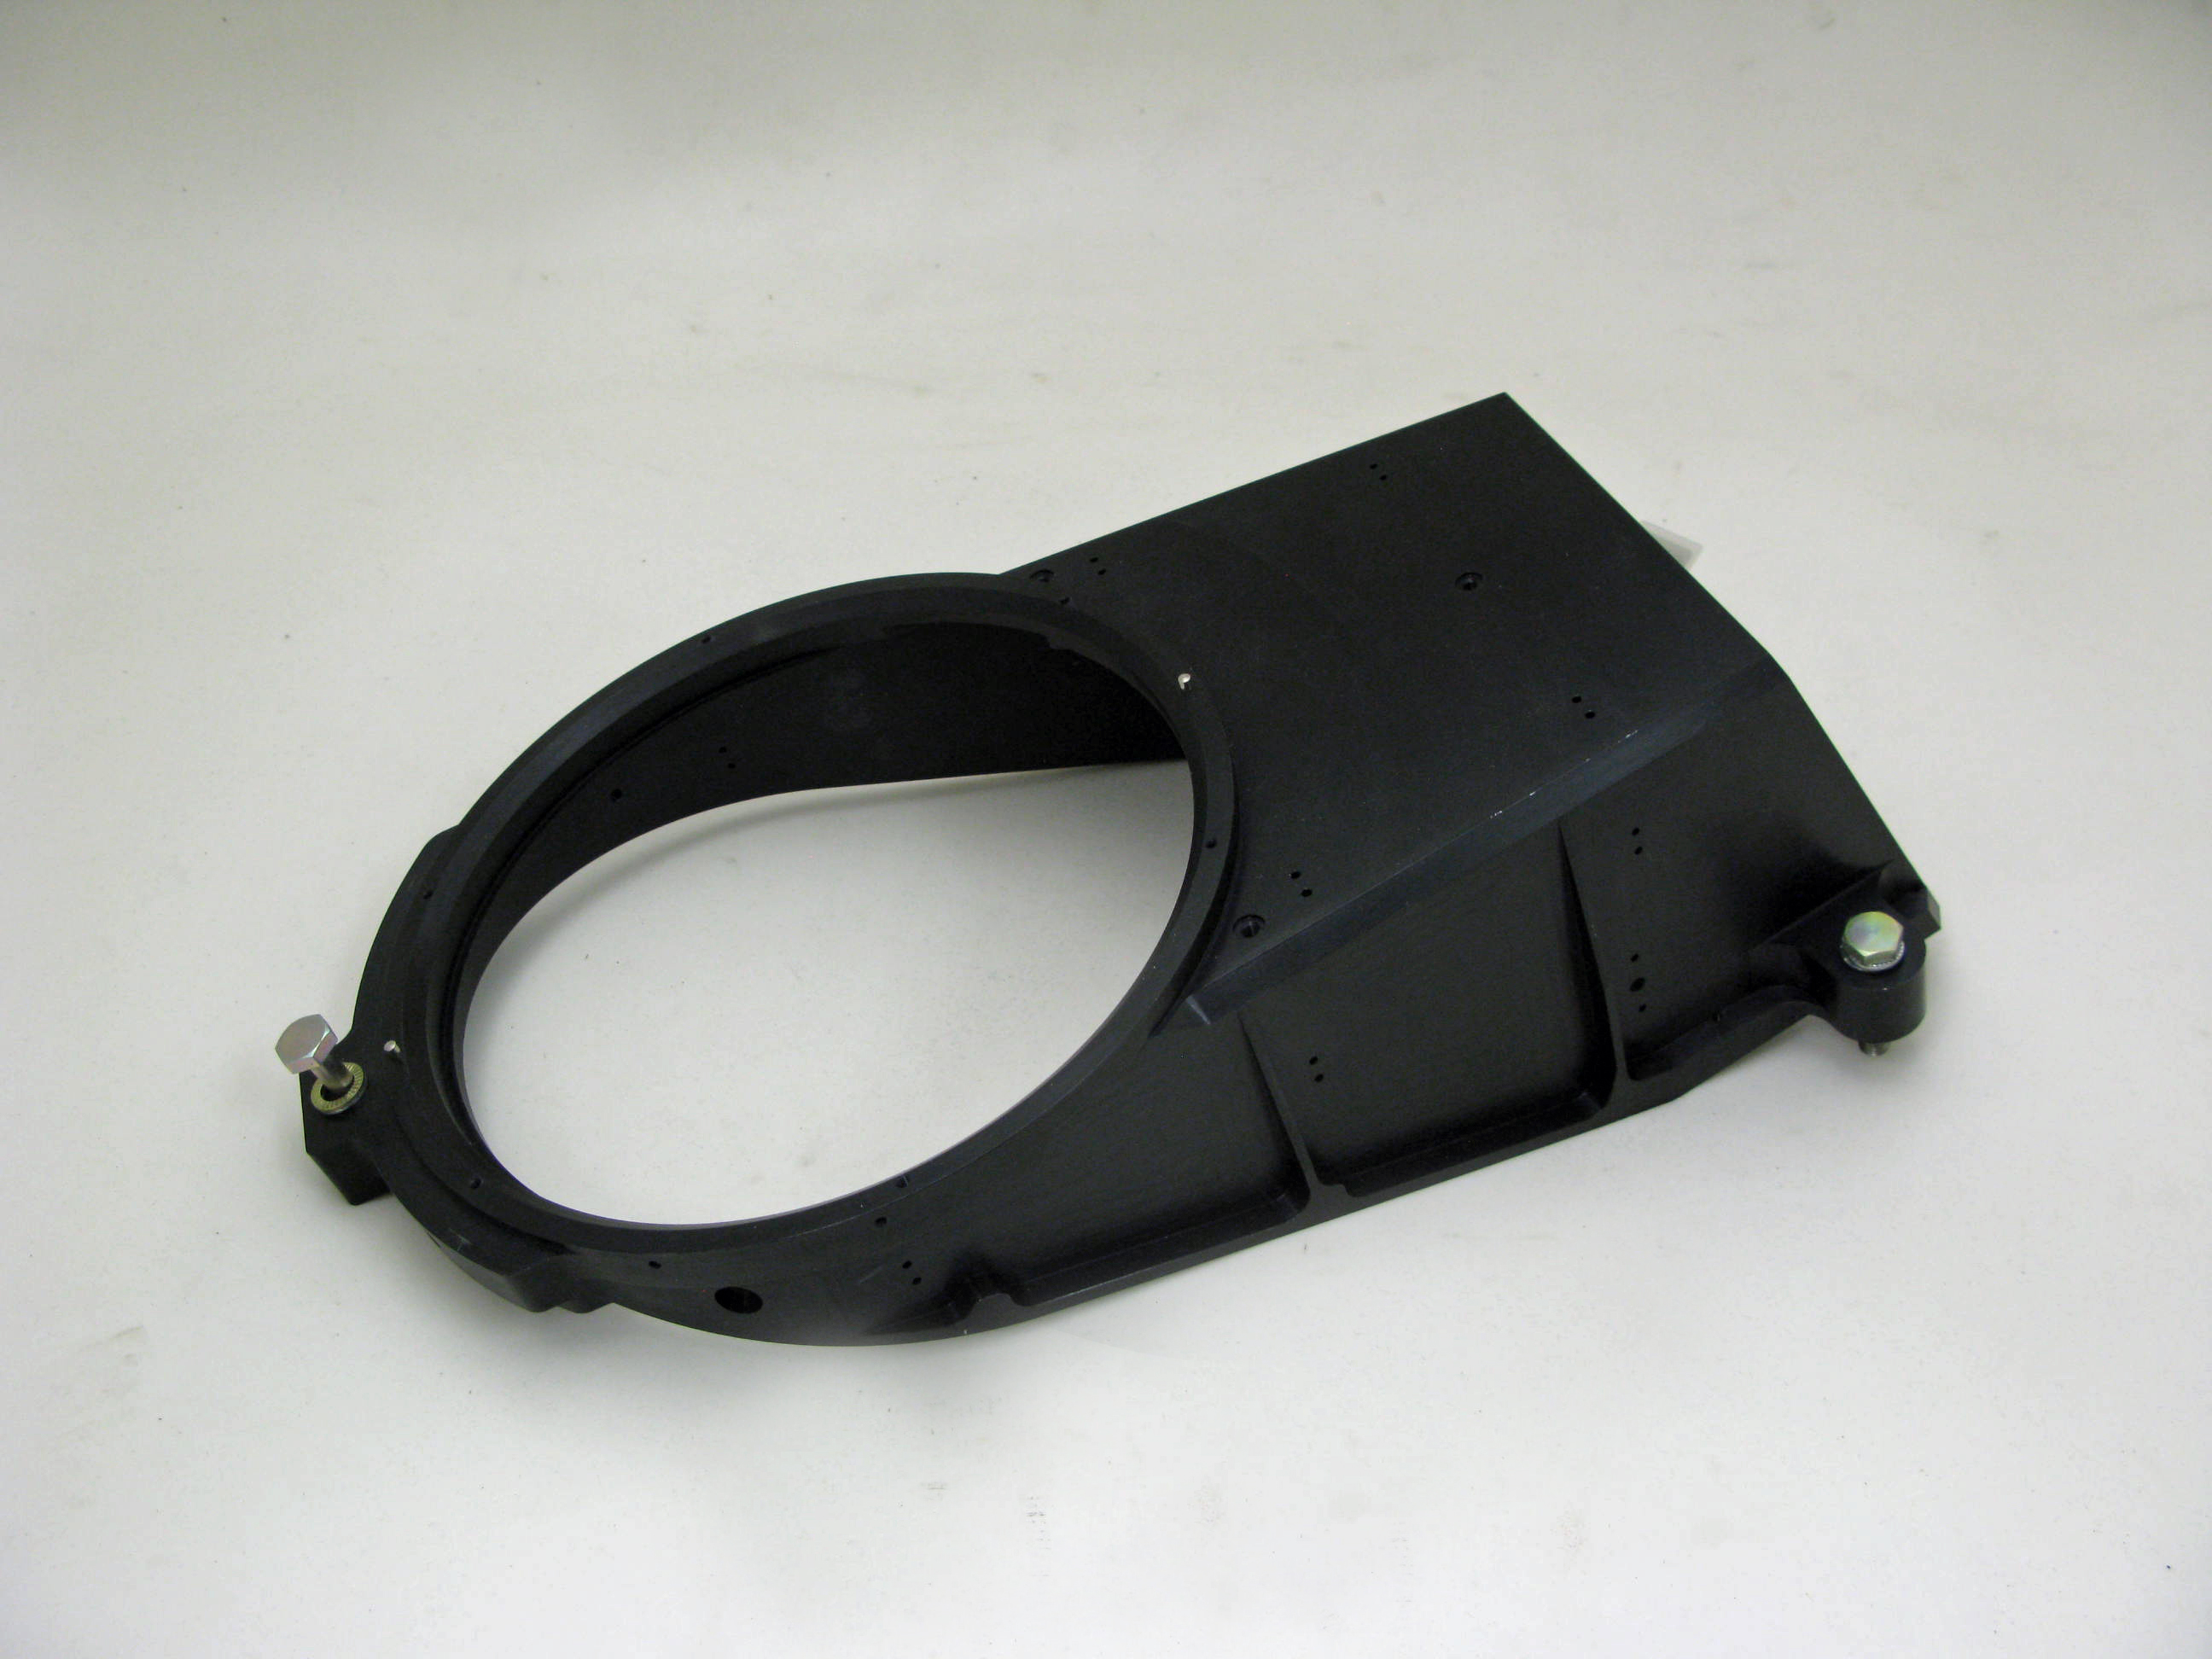 Top Cover for TecHUD Overhead Unit 